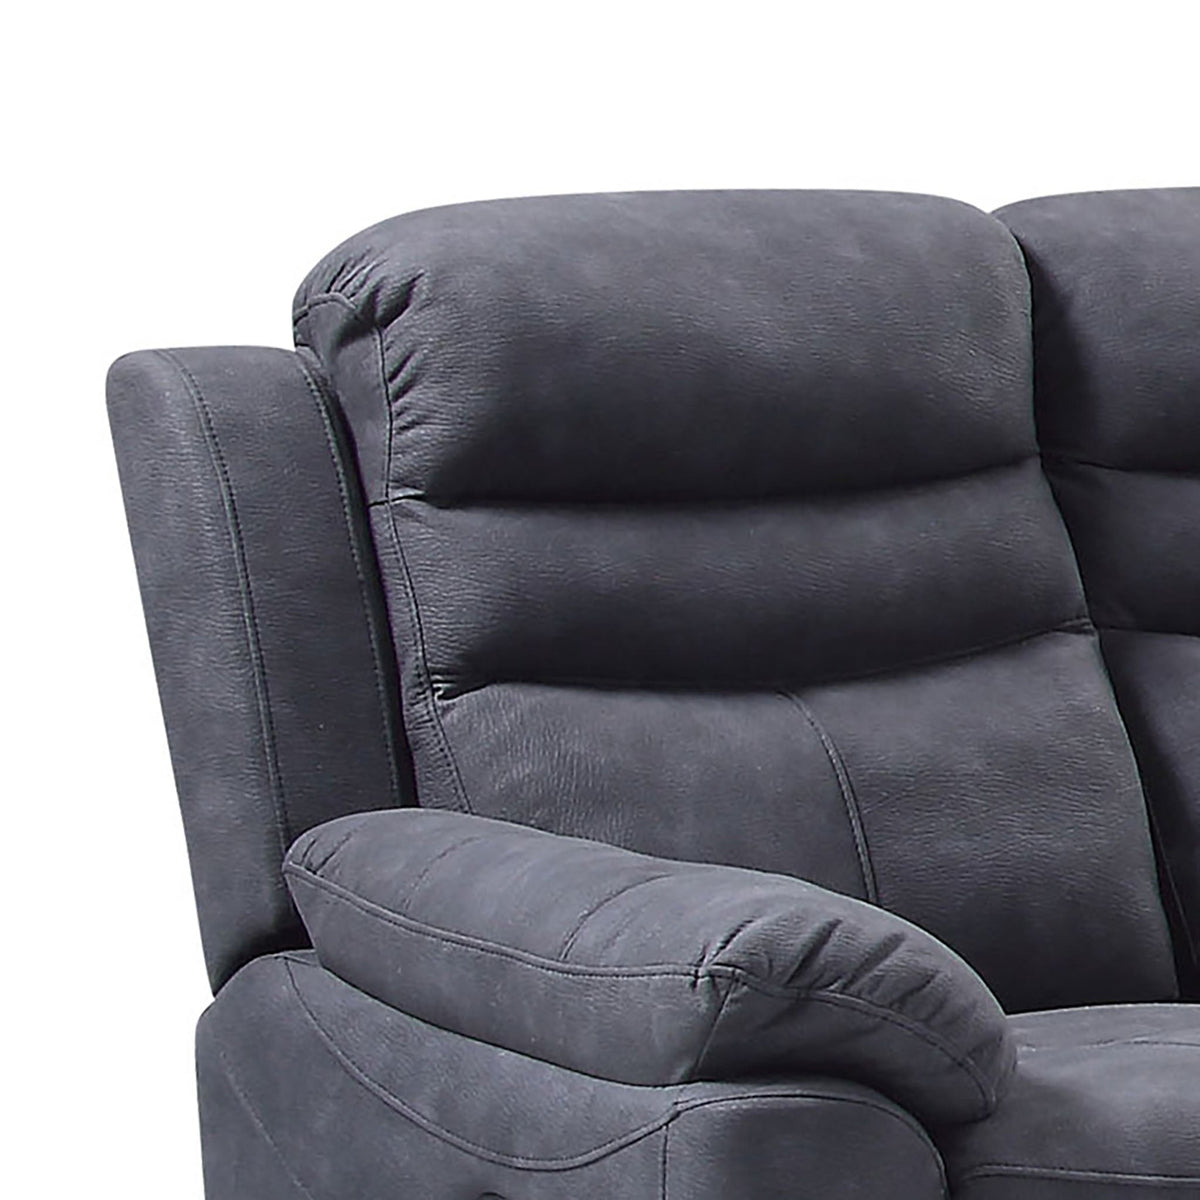 Conway Charcoal 2 Seater Recliner Sofa - Close up of back